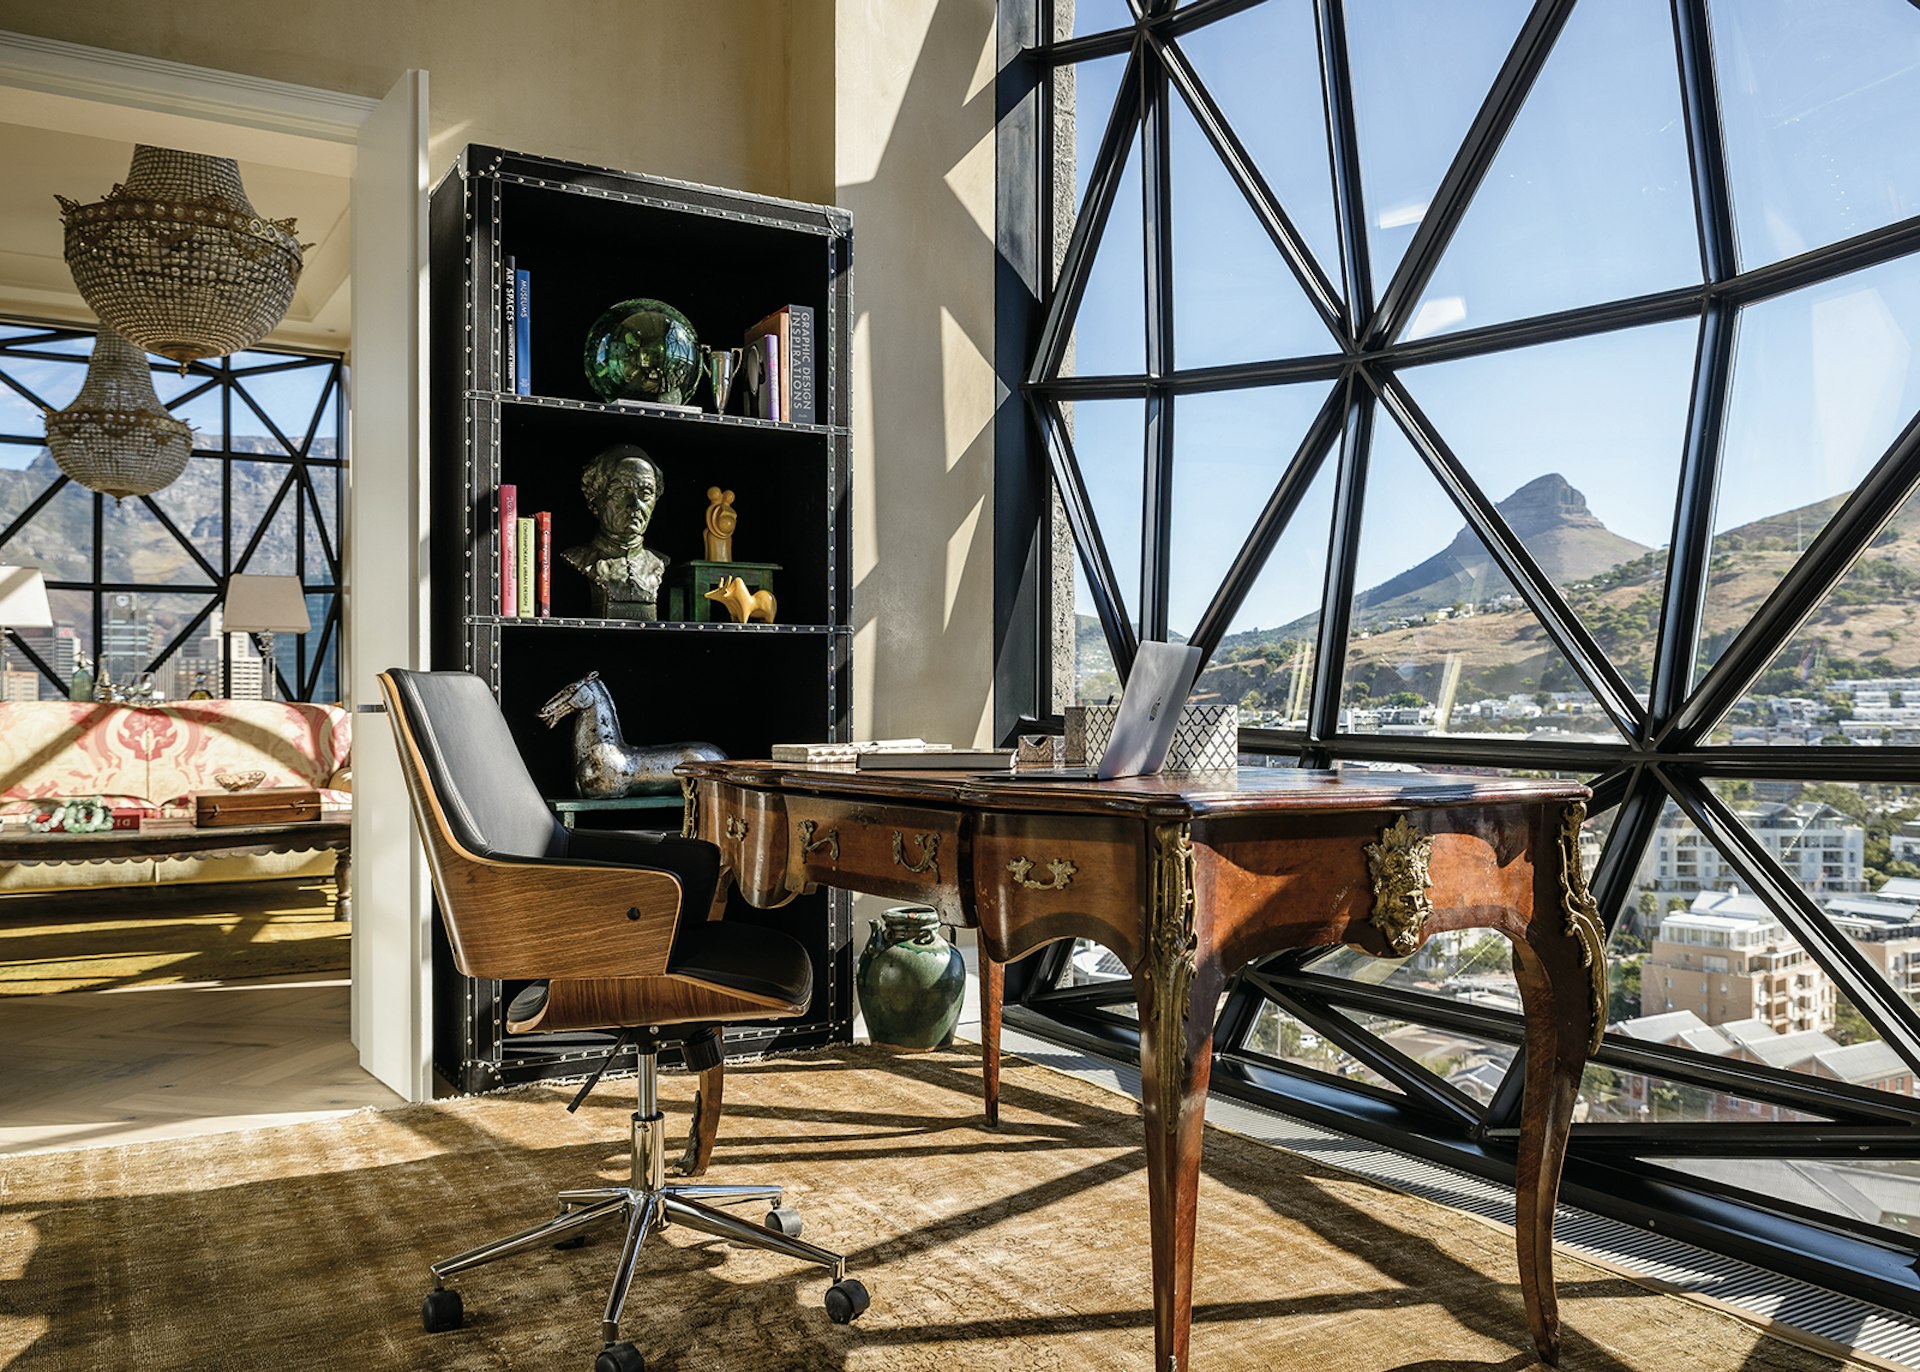 New places to stay - A view from the penthouse suite of the Silo Hotel © The Royal Portfolio